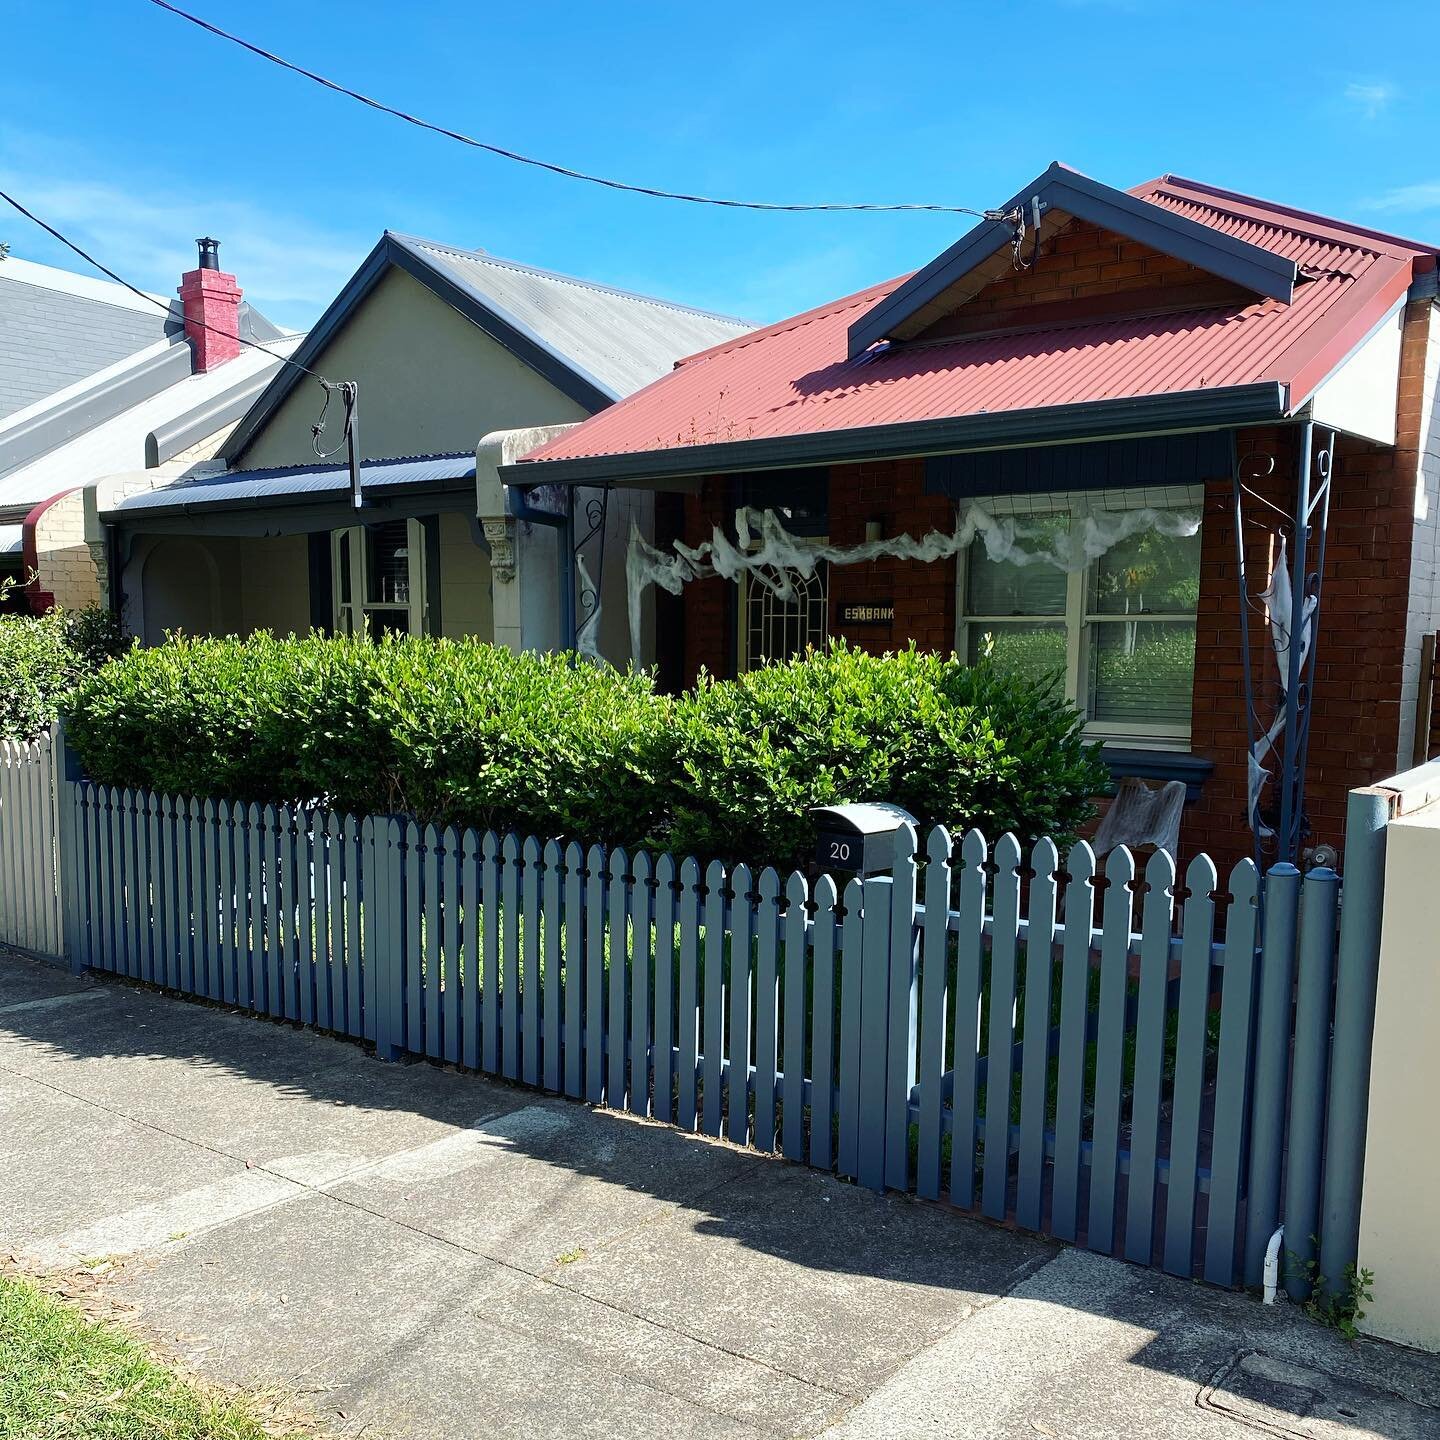 The perfect example of small home improvements that go a long way! 

Our clients existing fence was old and rotting and in need of replacement. In the same day we were able to transform this homes entrance, installing a new front fence and timber gat